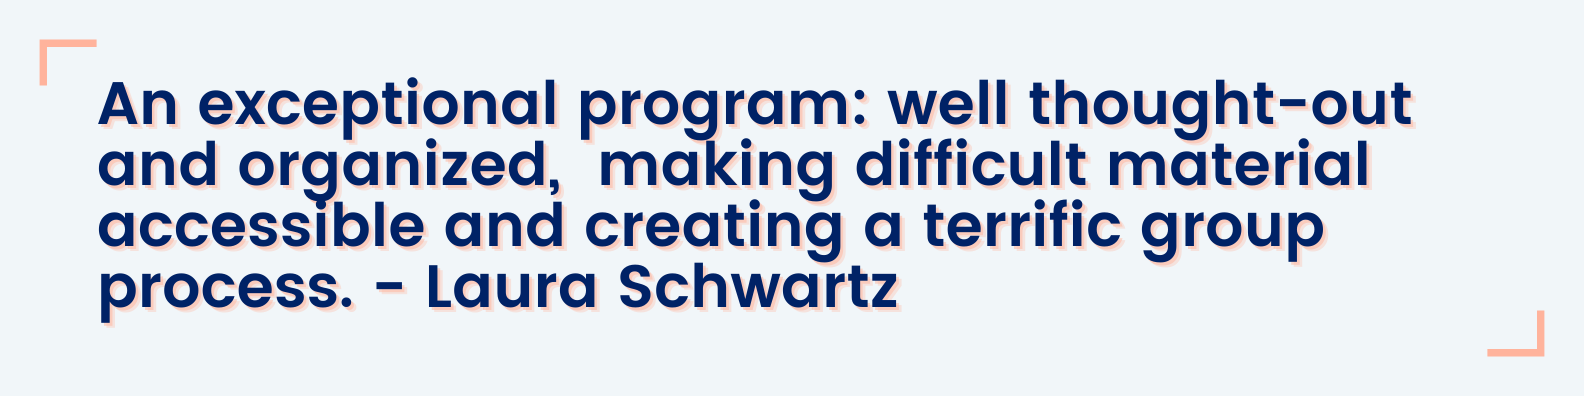 An exceptional program: well thought-out and organized, making difficult material accessible and creating a terrific group process. - Laura Schwartz